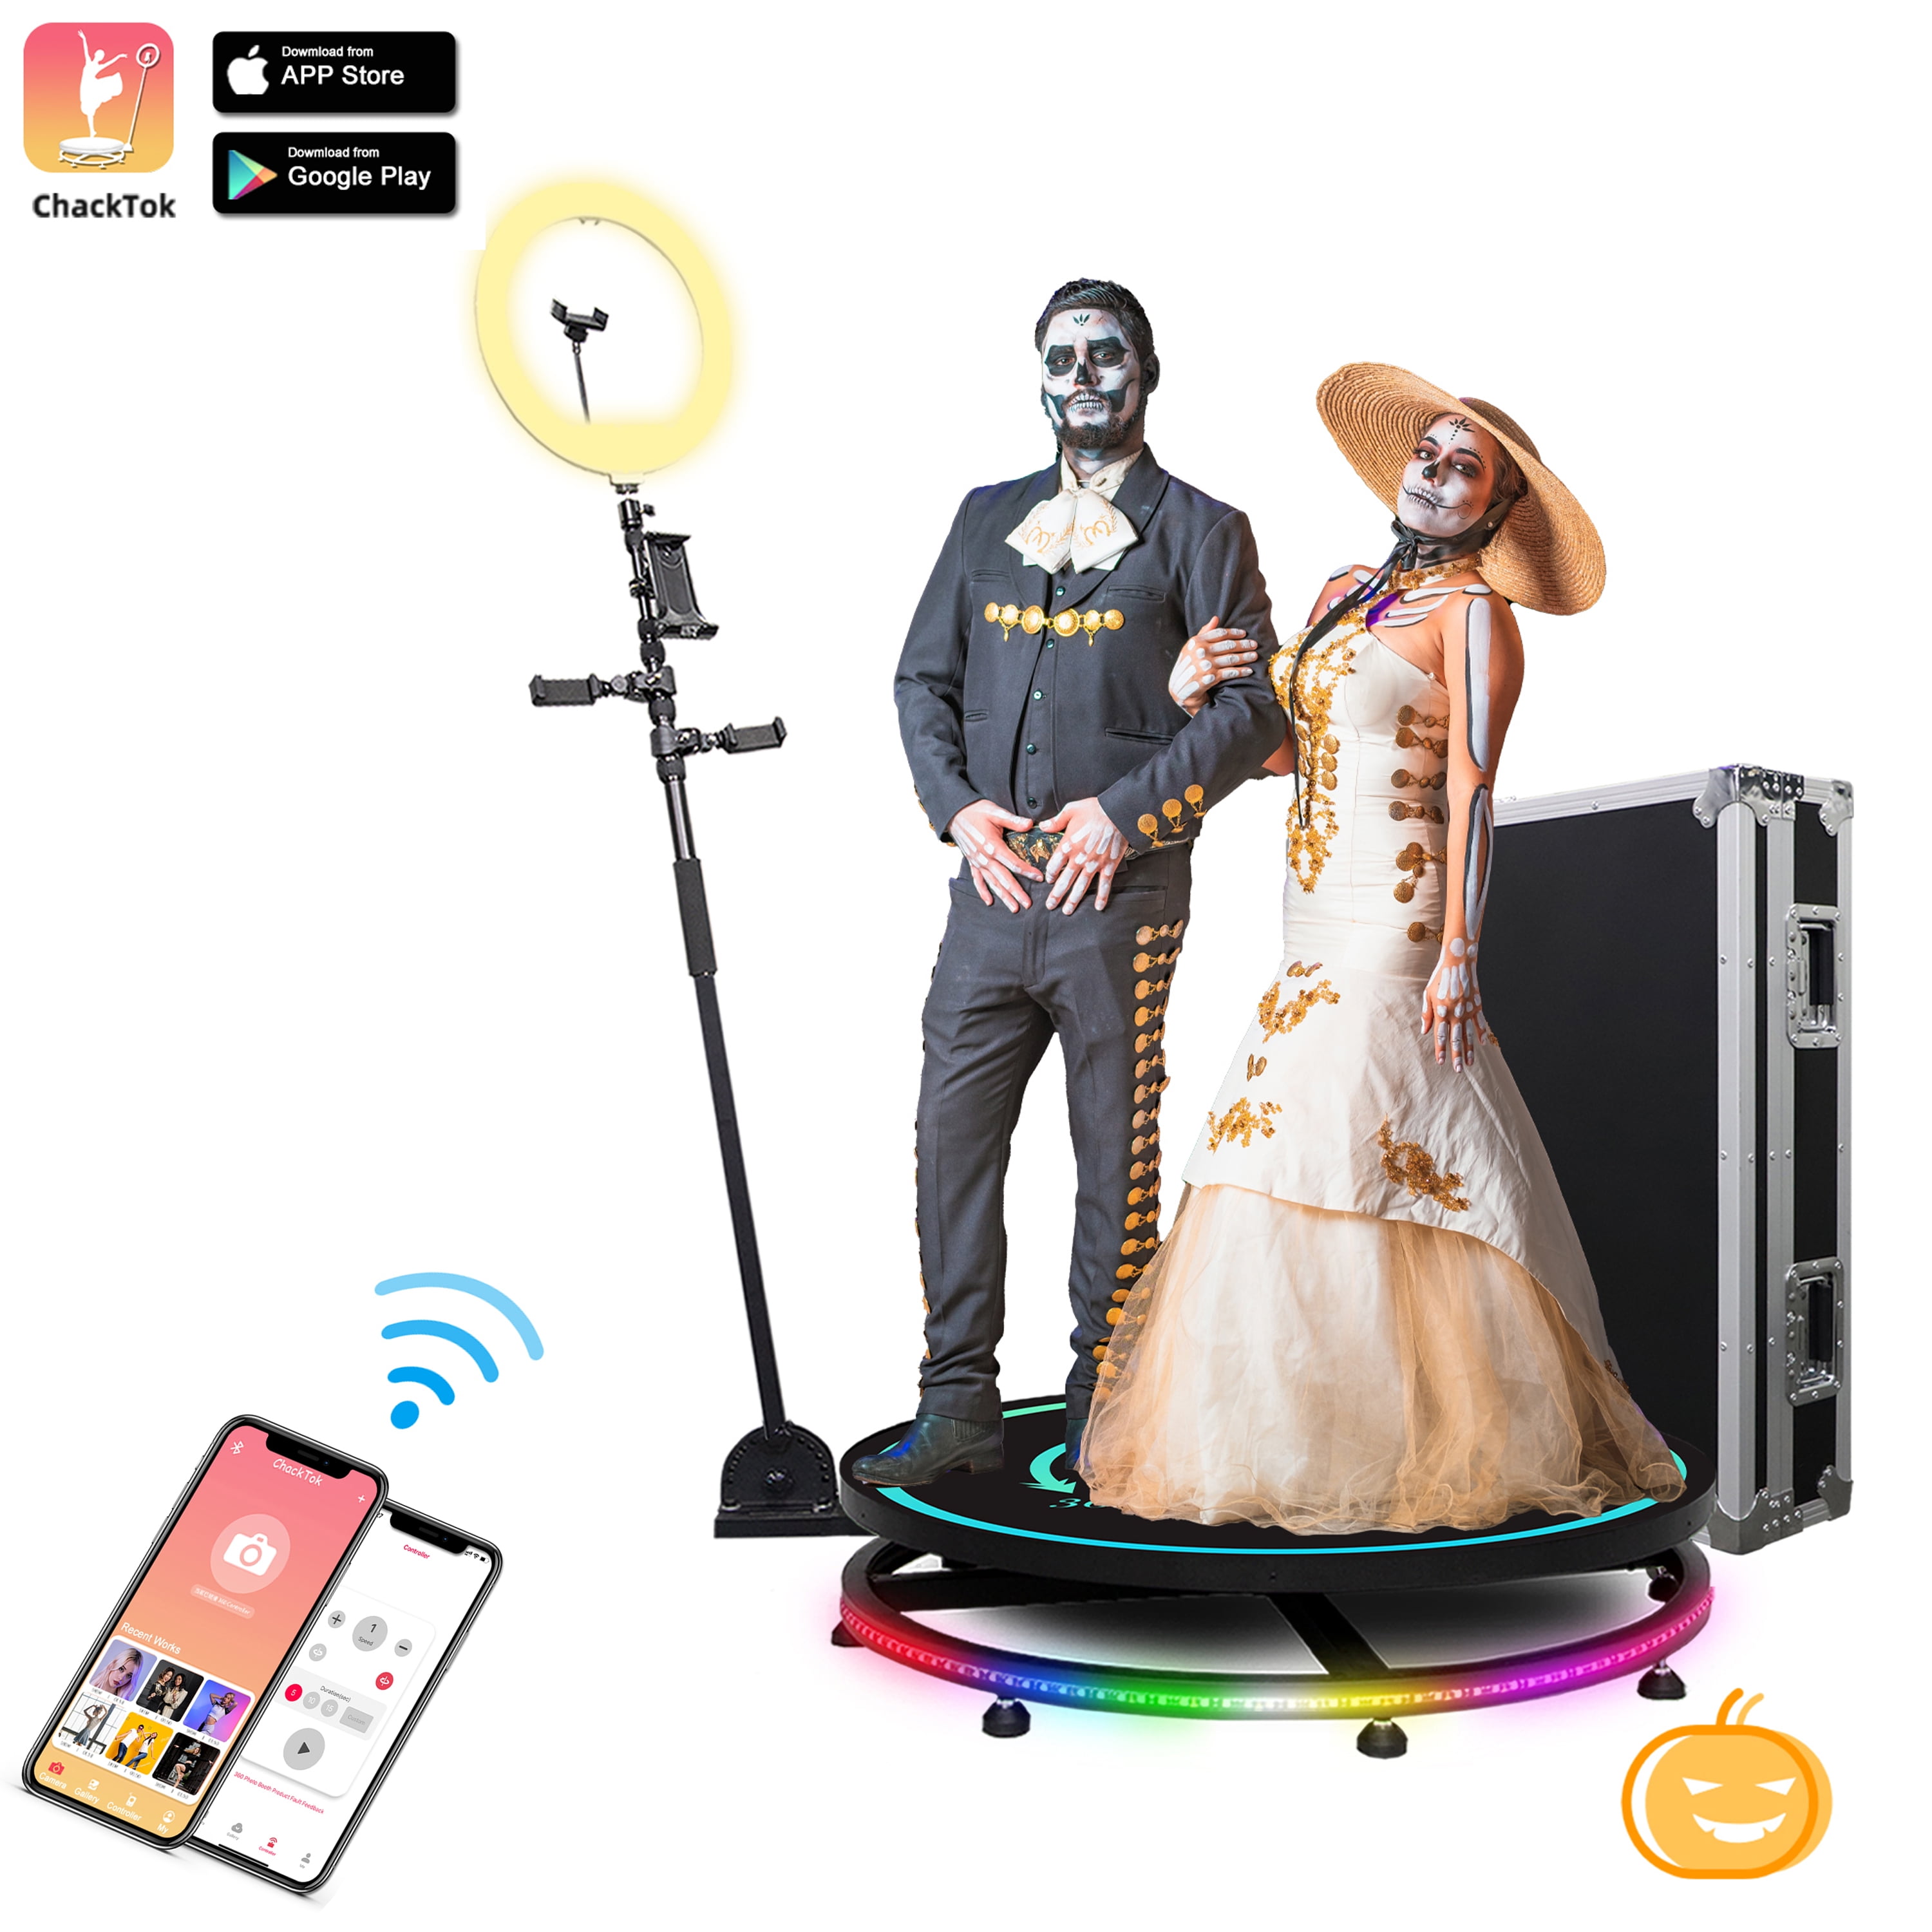 Portable Selfie Photomaton 360 Photo Booth Spinning 360 Degree Video Photo  Booth Machine - Buy Photomaton 360 Photo Booth,360 Degree Video Photo Booth